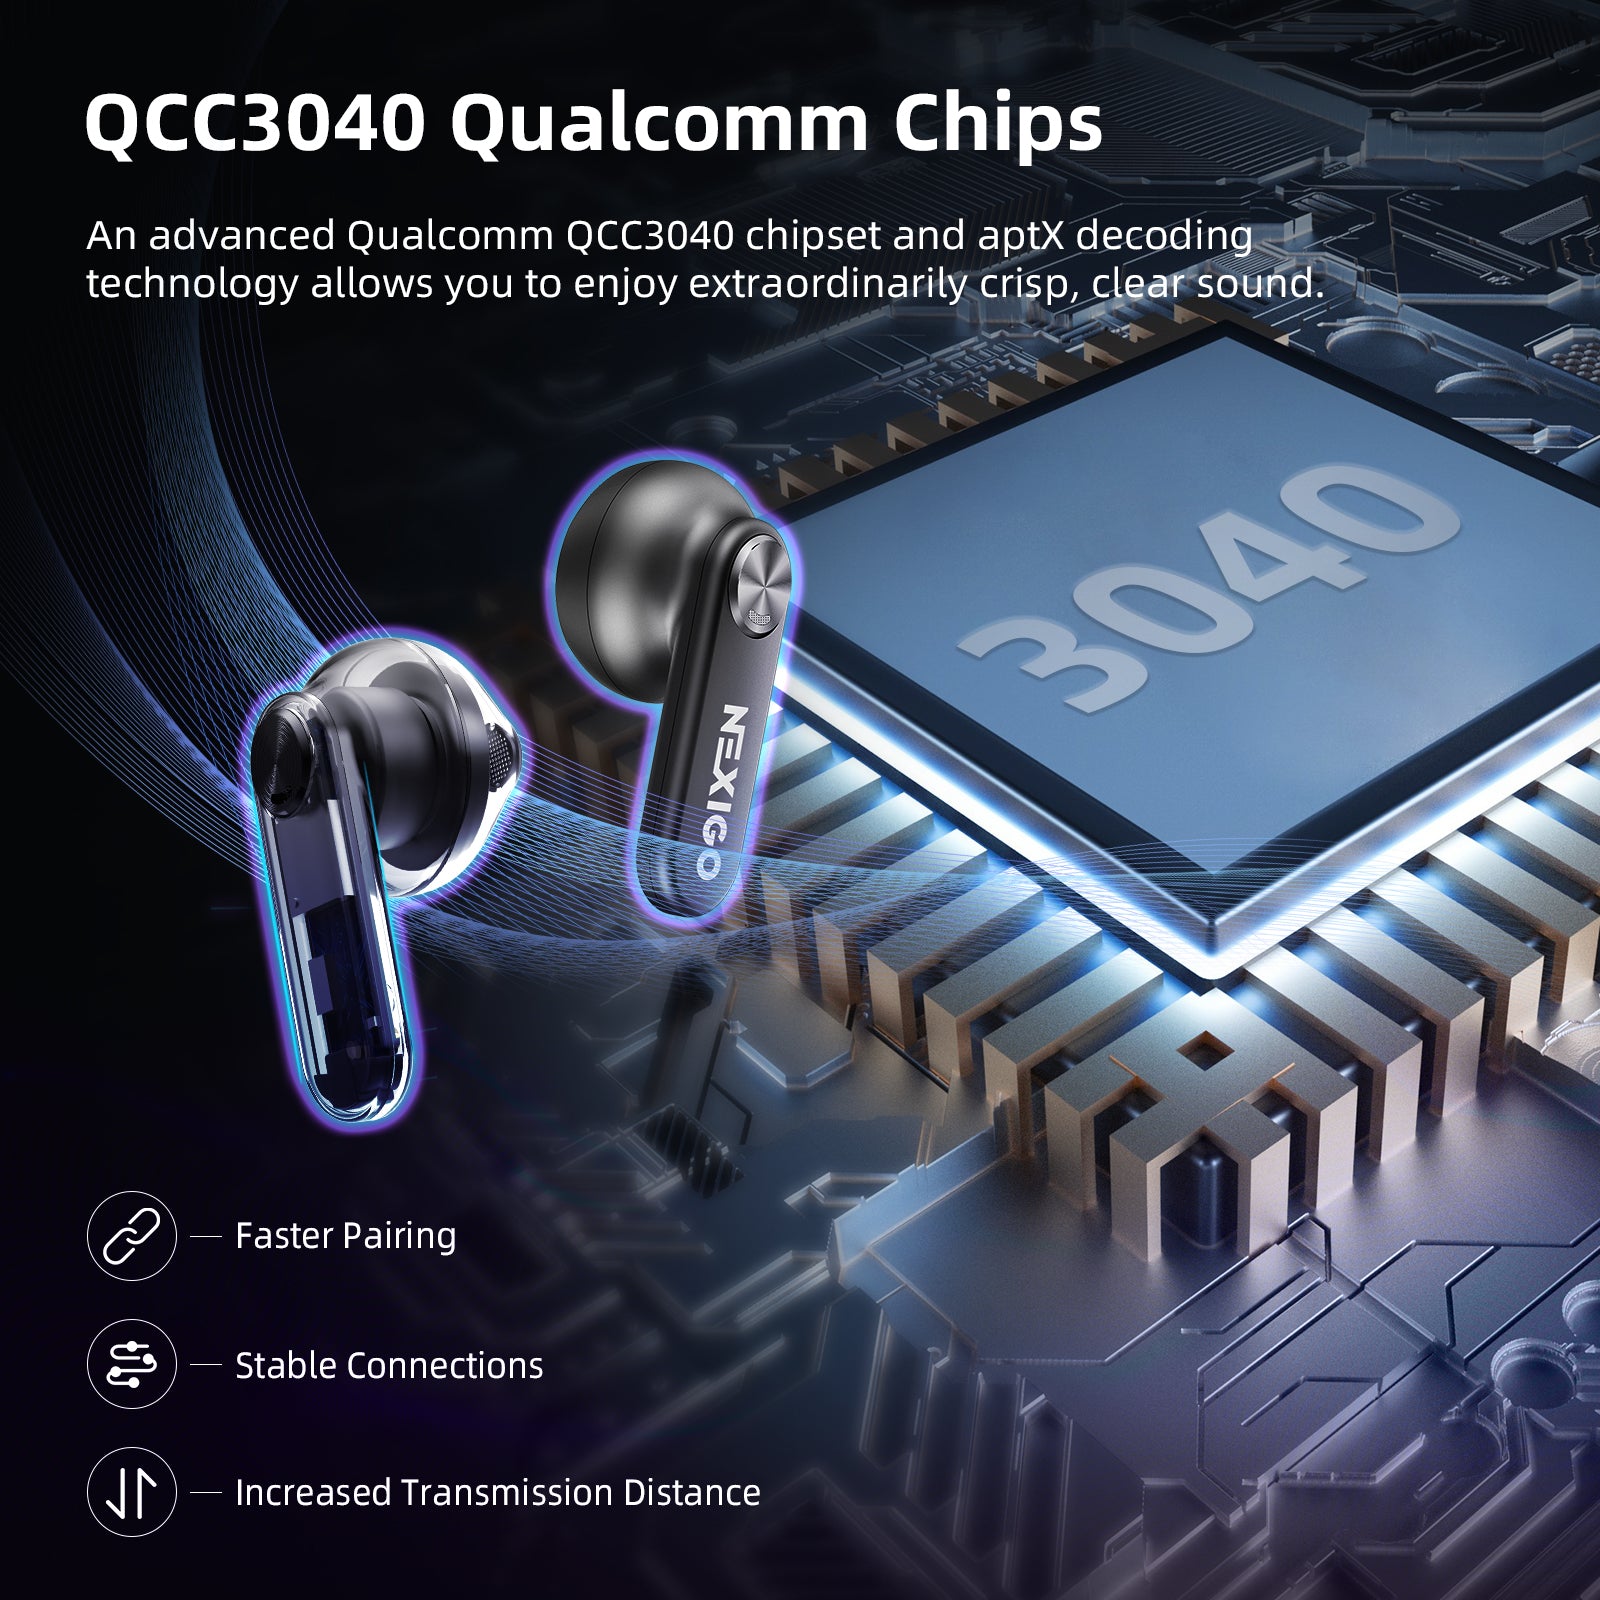 Enjoy crystal-clear sound with an advanced Qualcomm QCC3040 chipset and apt decoding. 